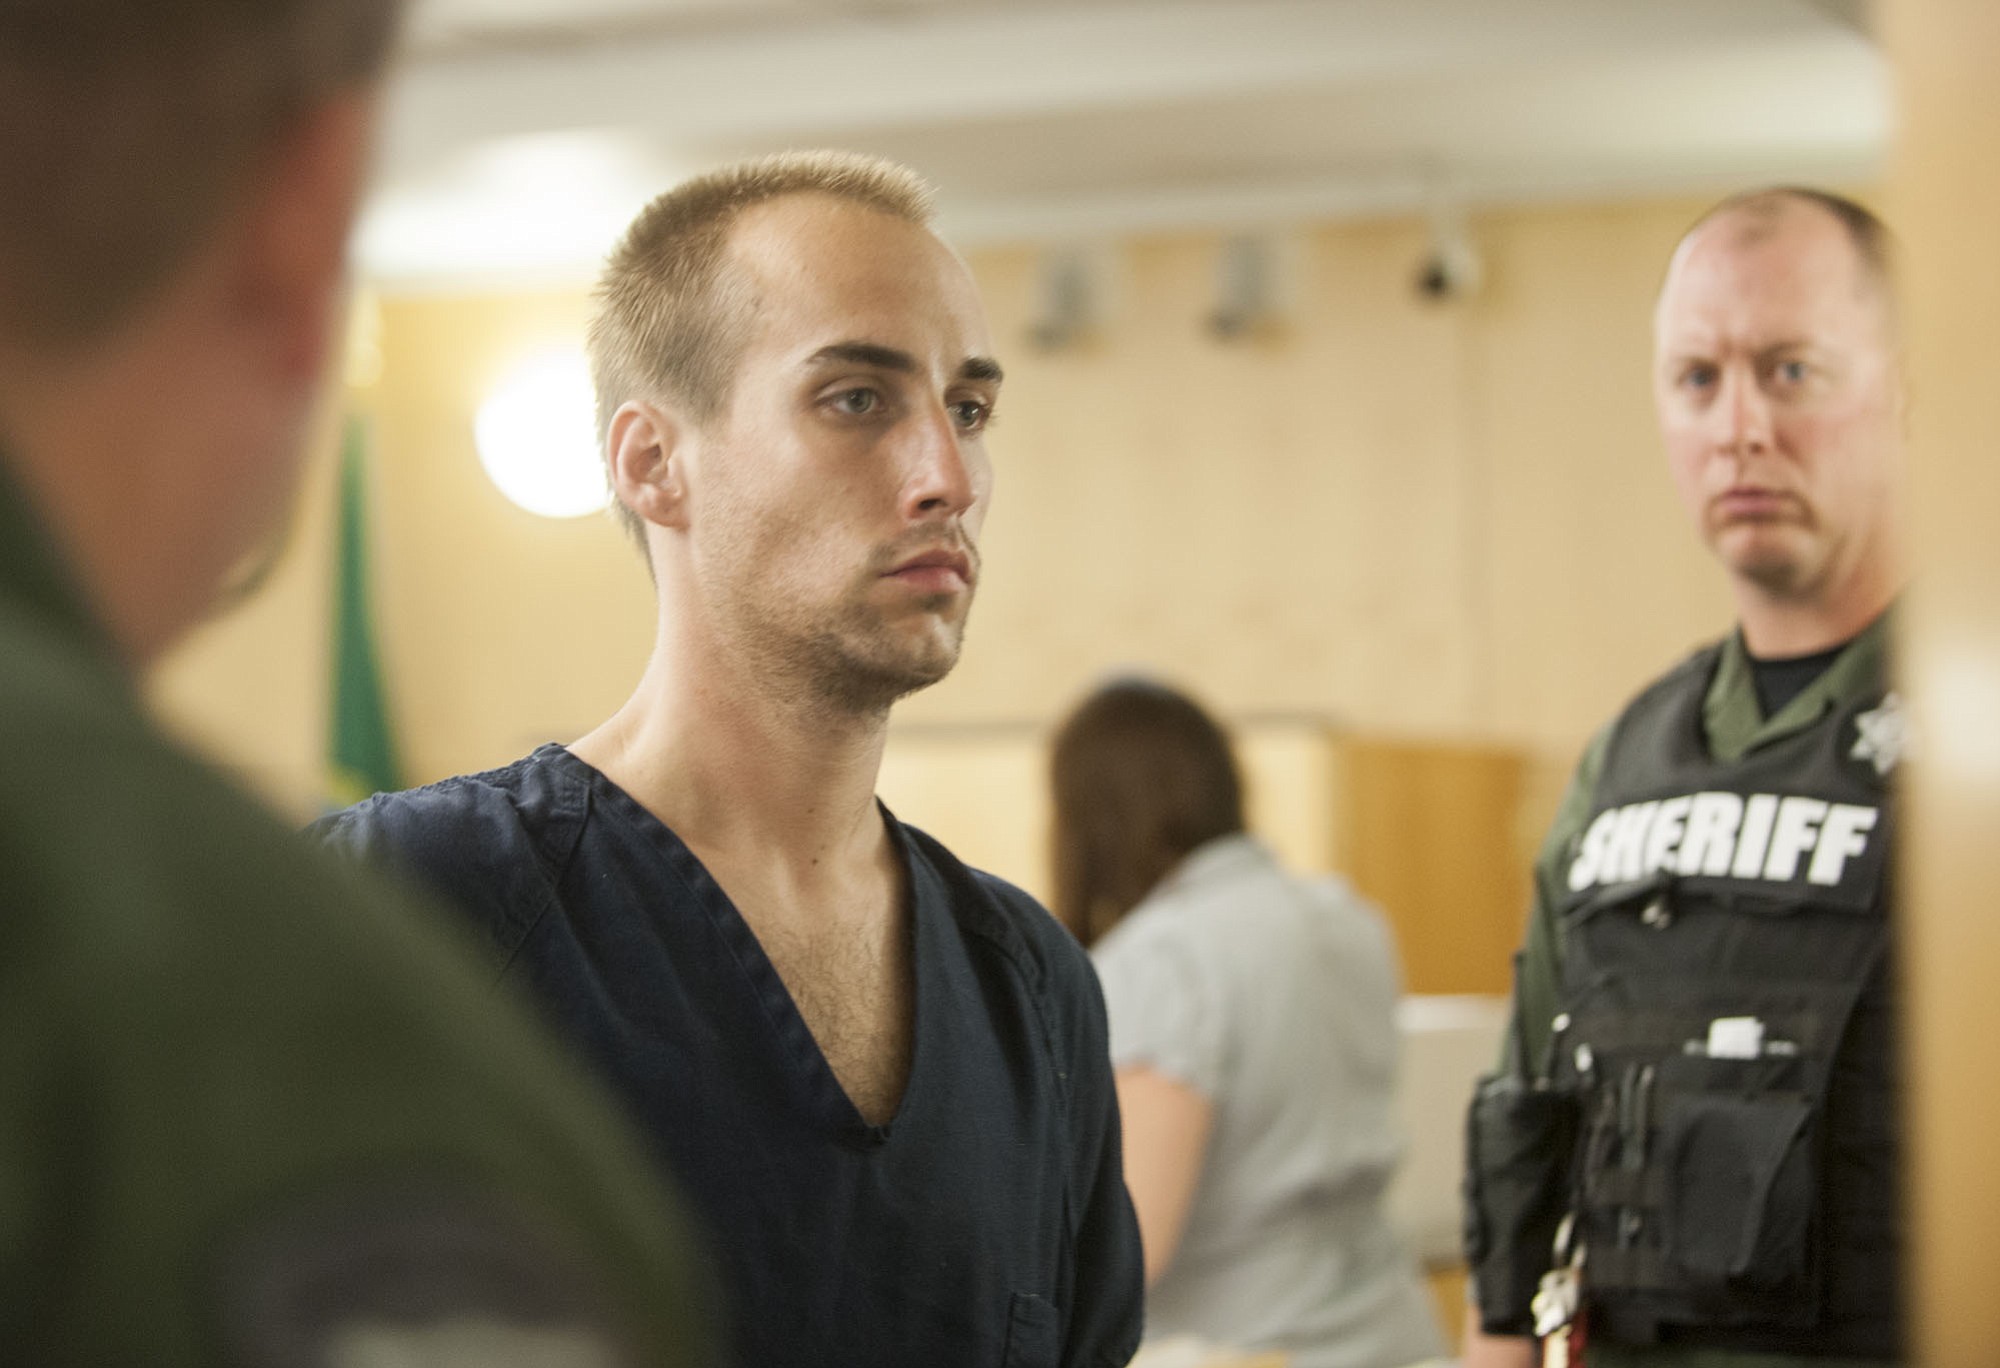 Brian S. Haack, 24, of Vancouver makes a first appearance Monday in Clark County Superior Court.